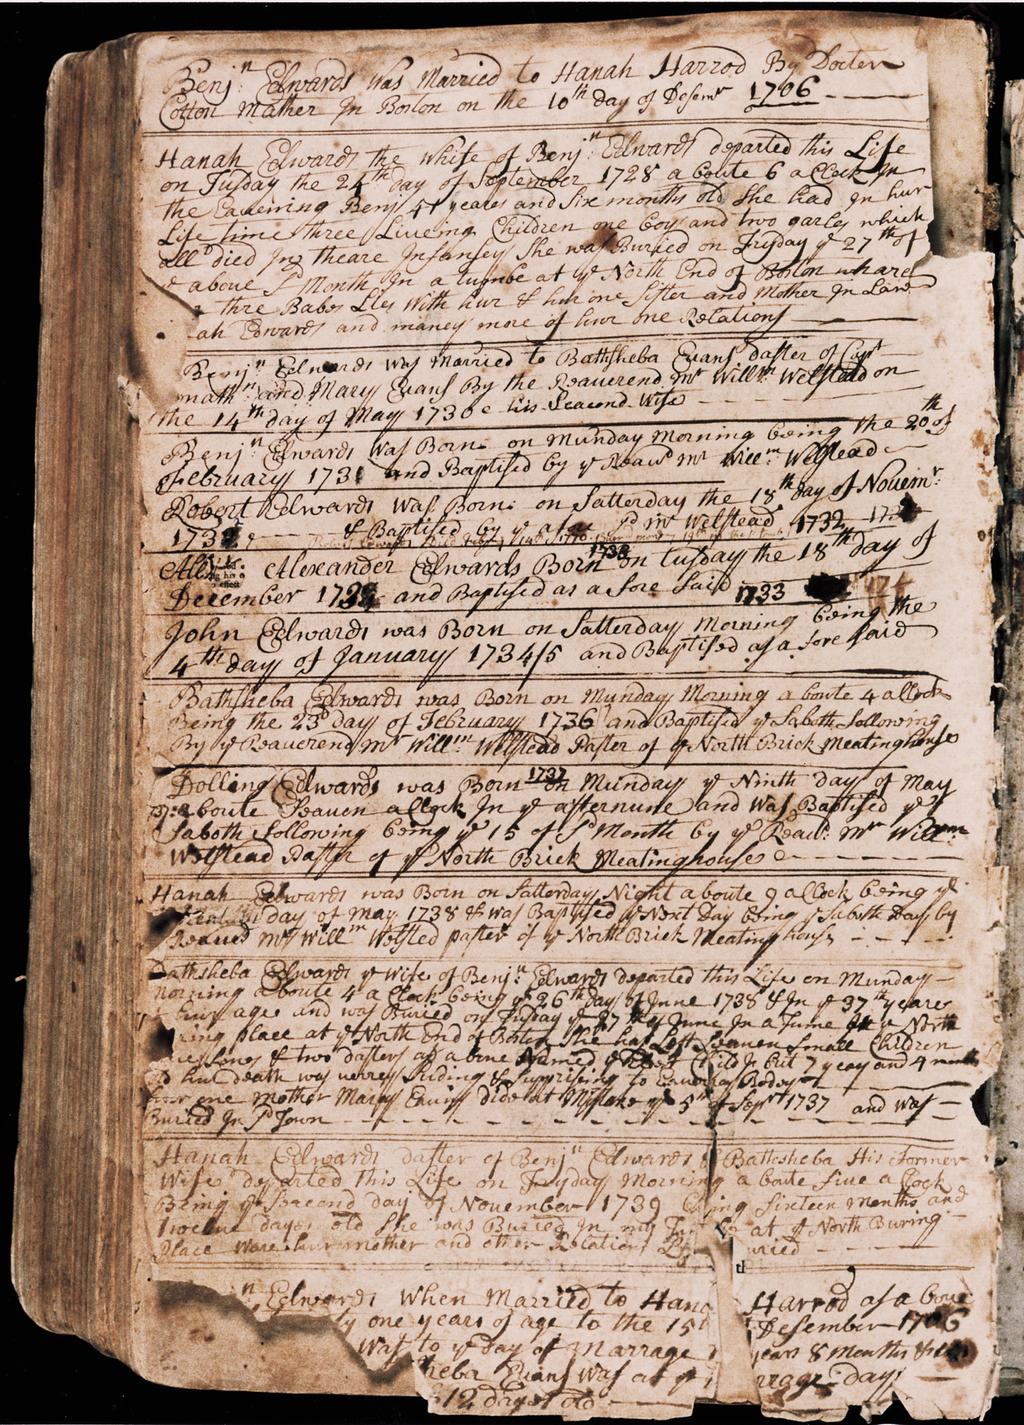 A page from the 1708 Edwards family Bible with